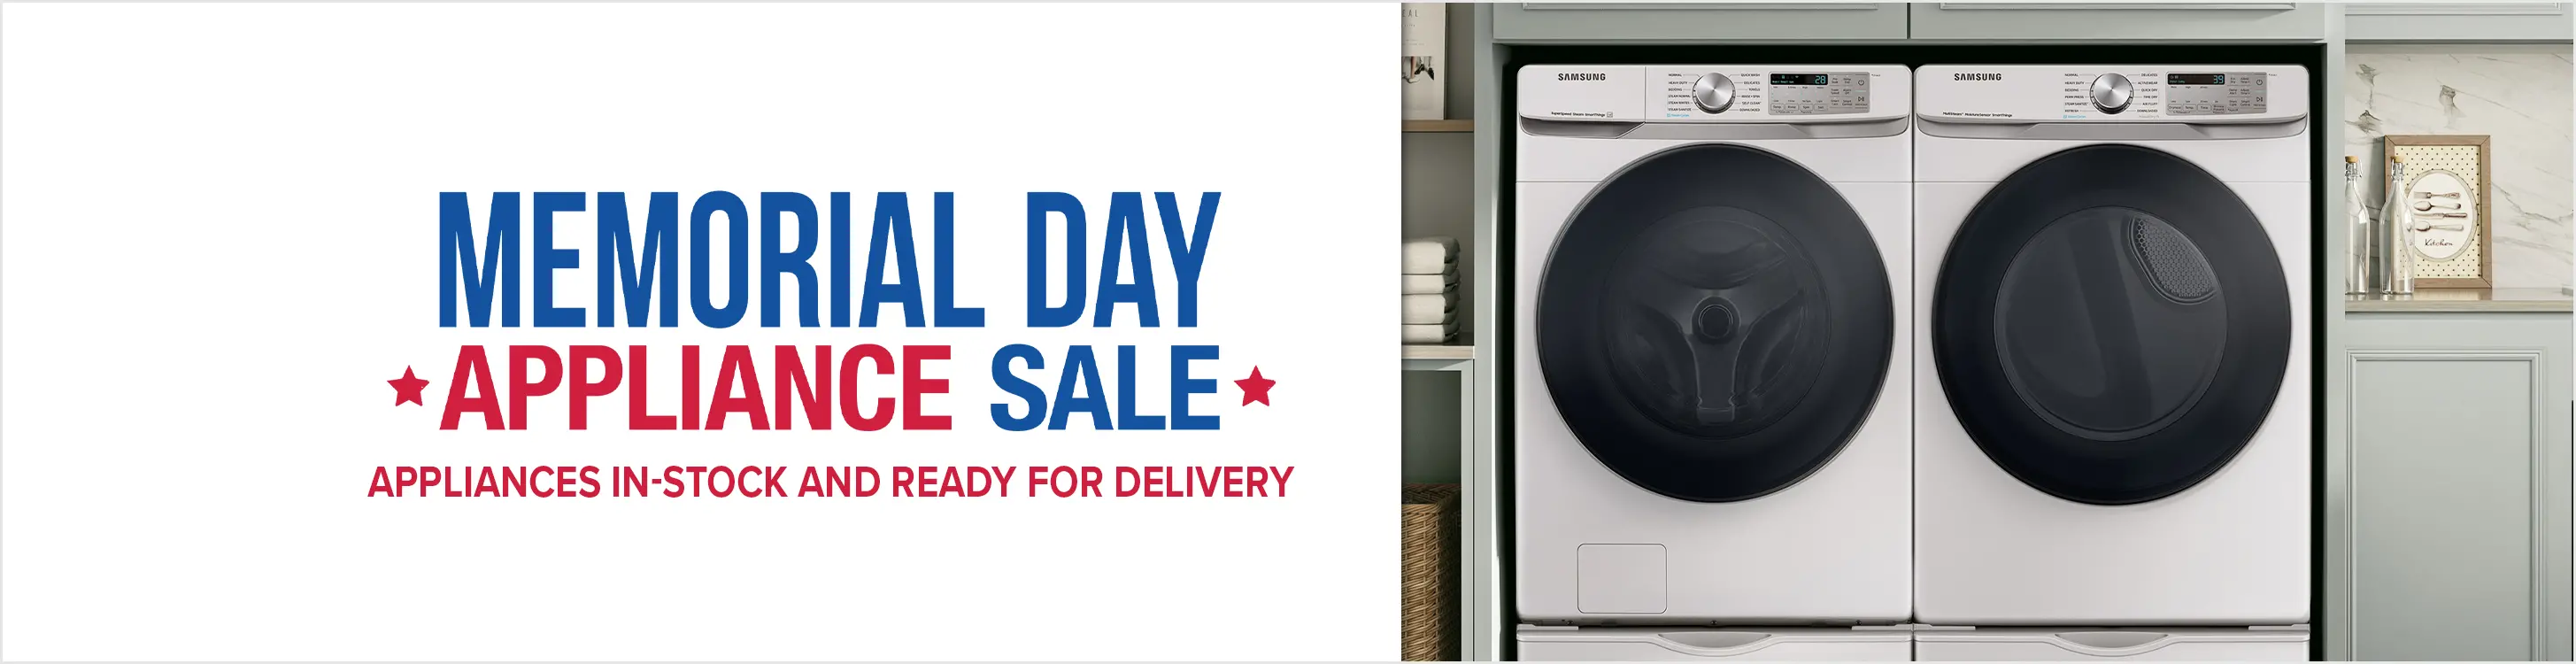 Memorial Day Appliance Sale. Appliances In Stock and Ready for Delivery.